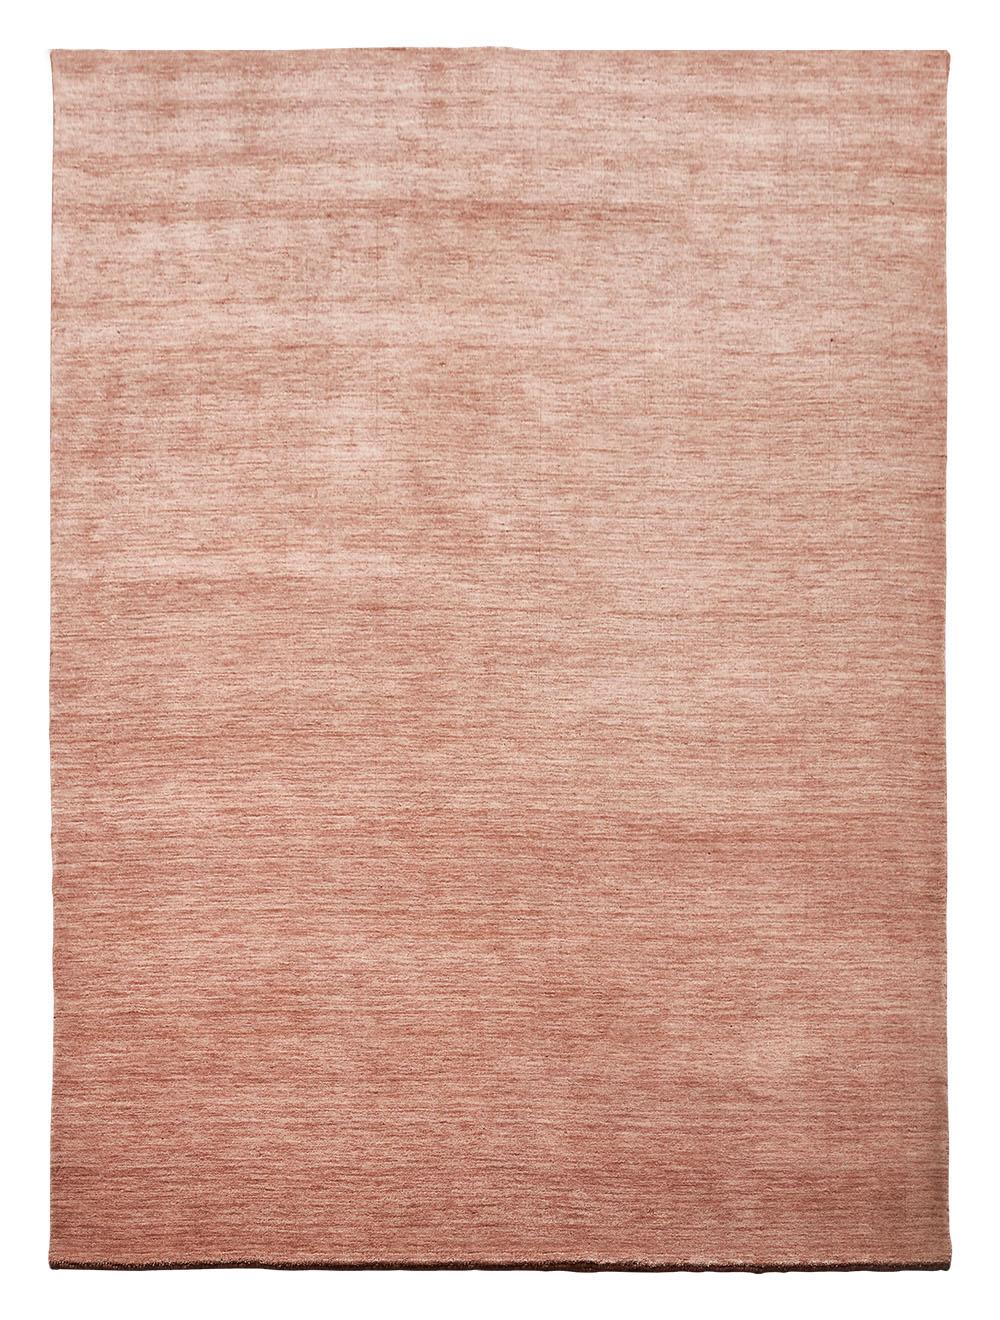 Blush earth carpet by Massimo Copenhagen
Handwoven
Materials: 100% New Zealand Wool
Dimensions: W 300 x H 400 cm
Available colors: Verte grey, moss green, blush, sea green, and charcoal.
Other dimensions are available: 140 x 200 cm, 170 x 240